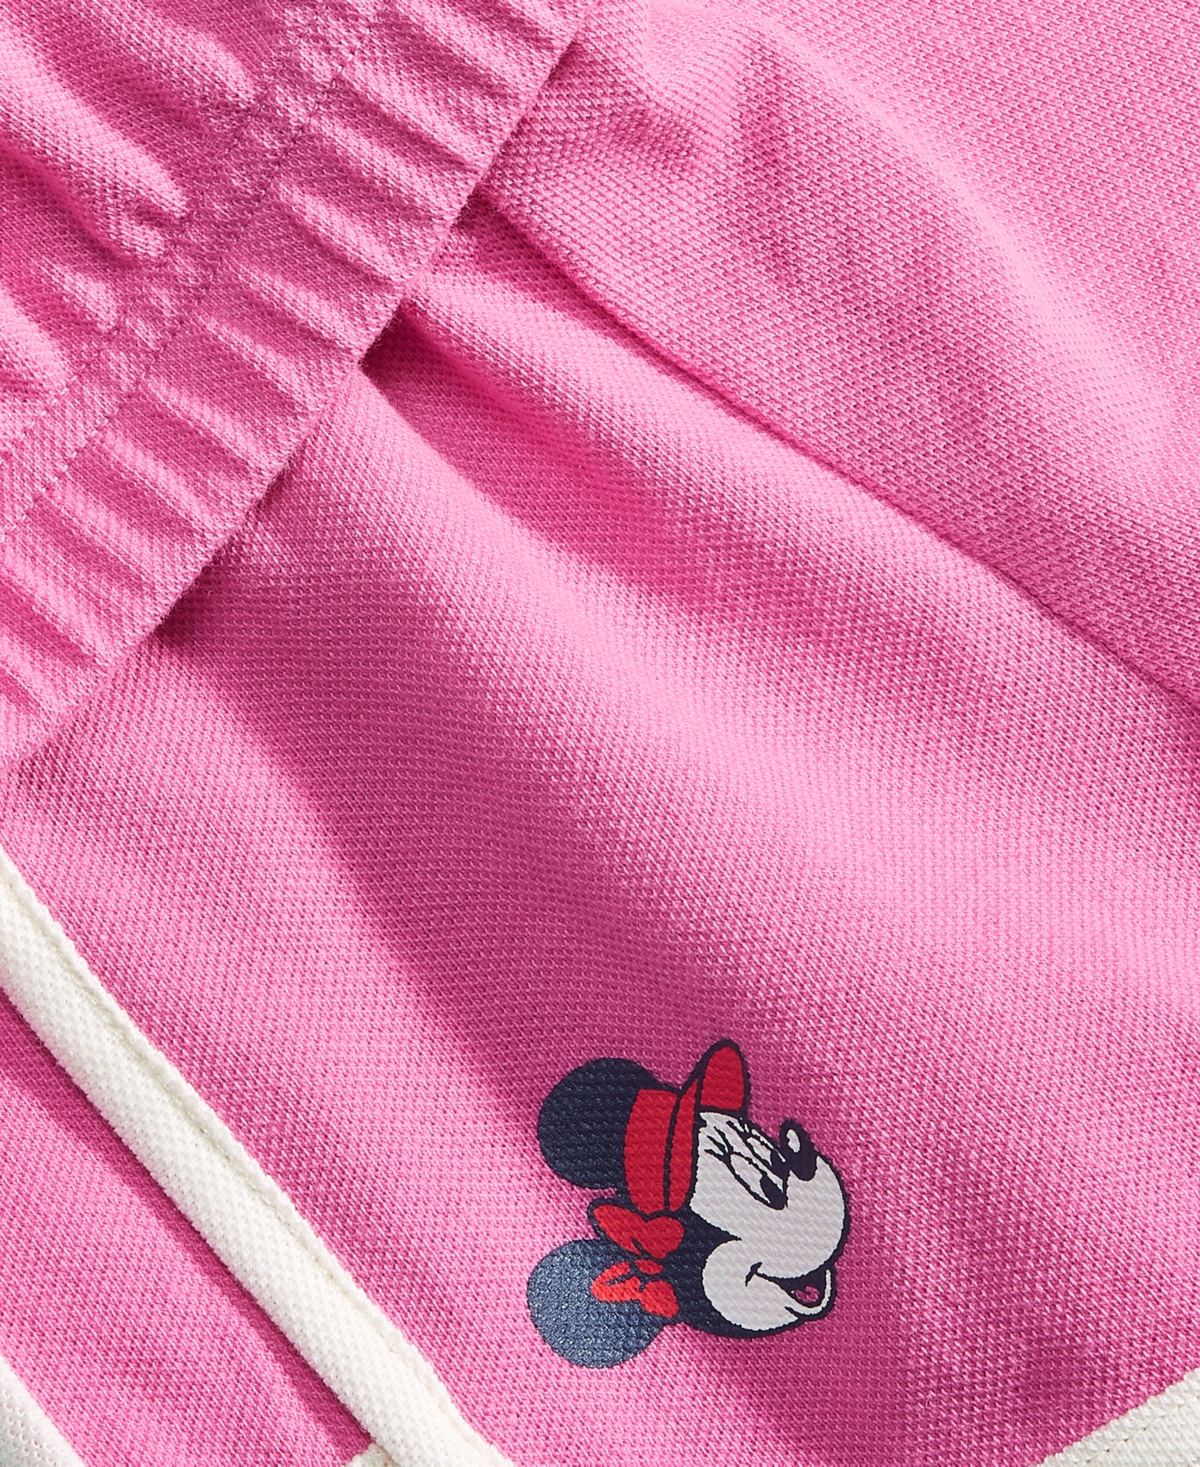 Shop Disney Toddler & Little Girls Minnie Mouse Polo Shirt & Shorts, 2 Piece Set In Pink